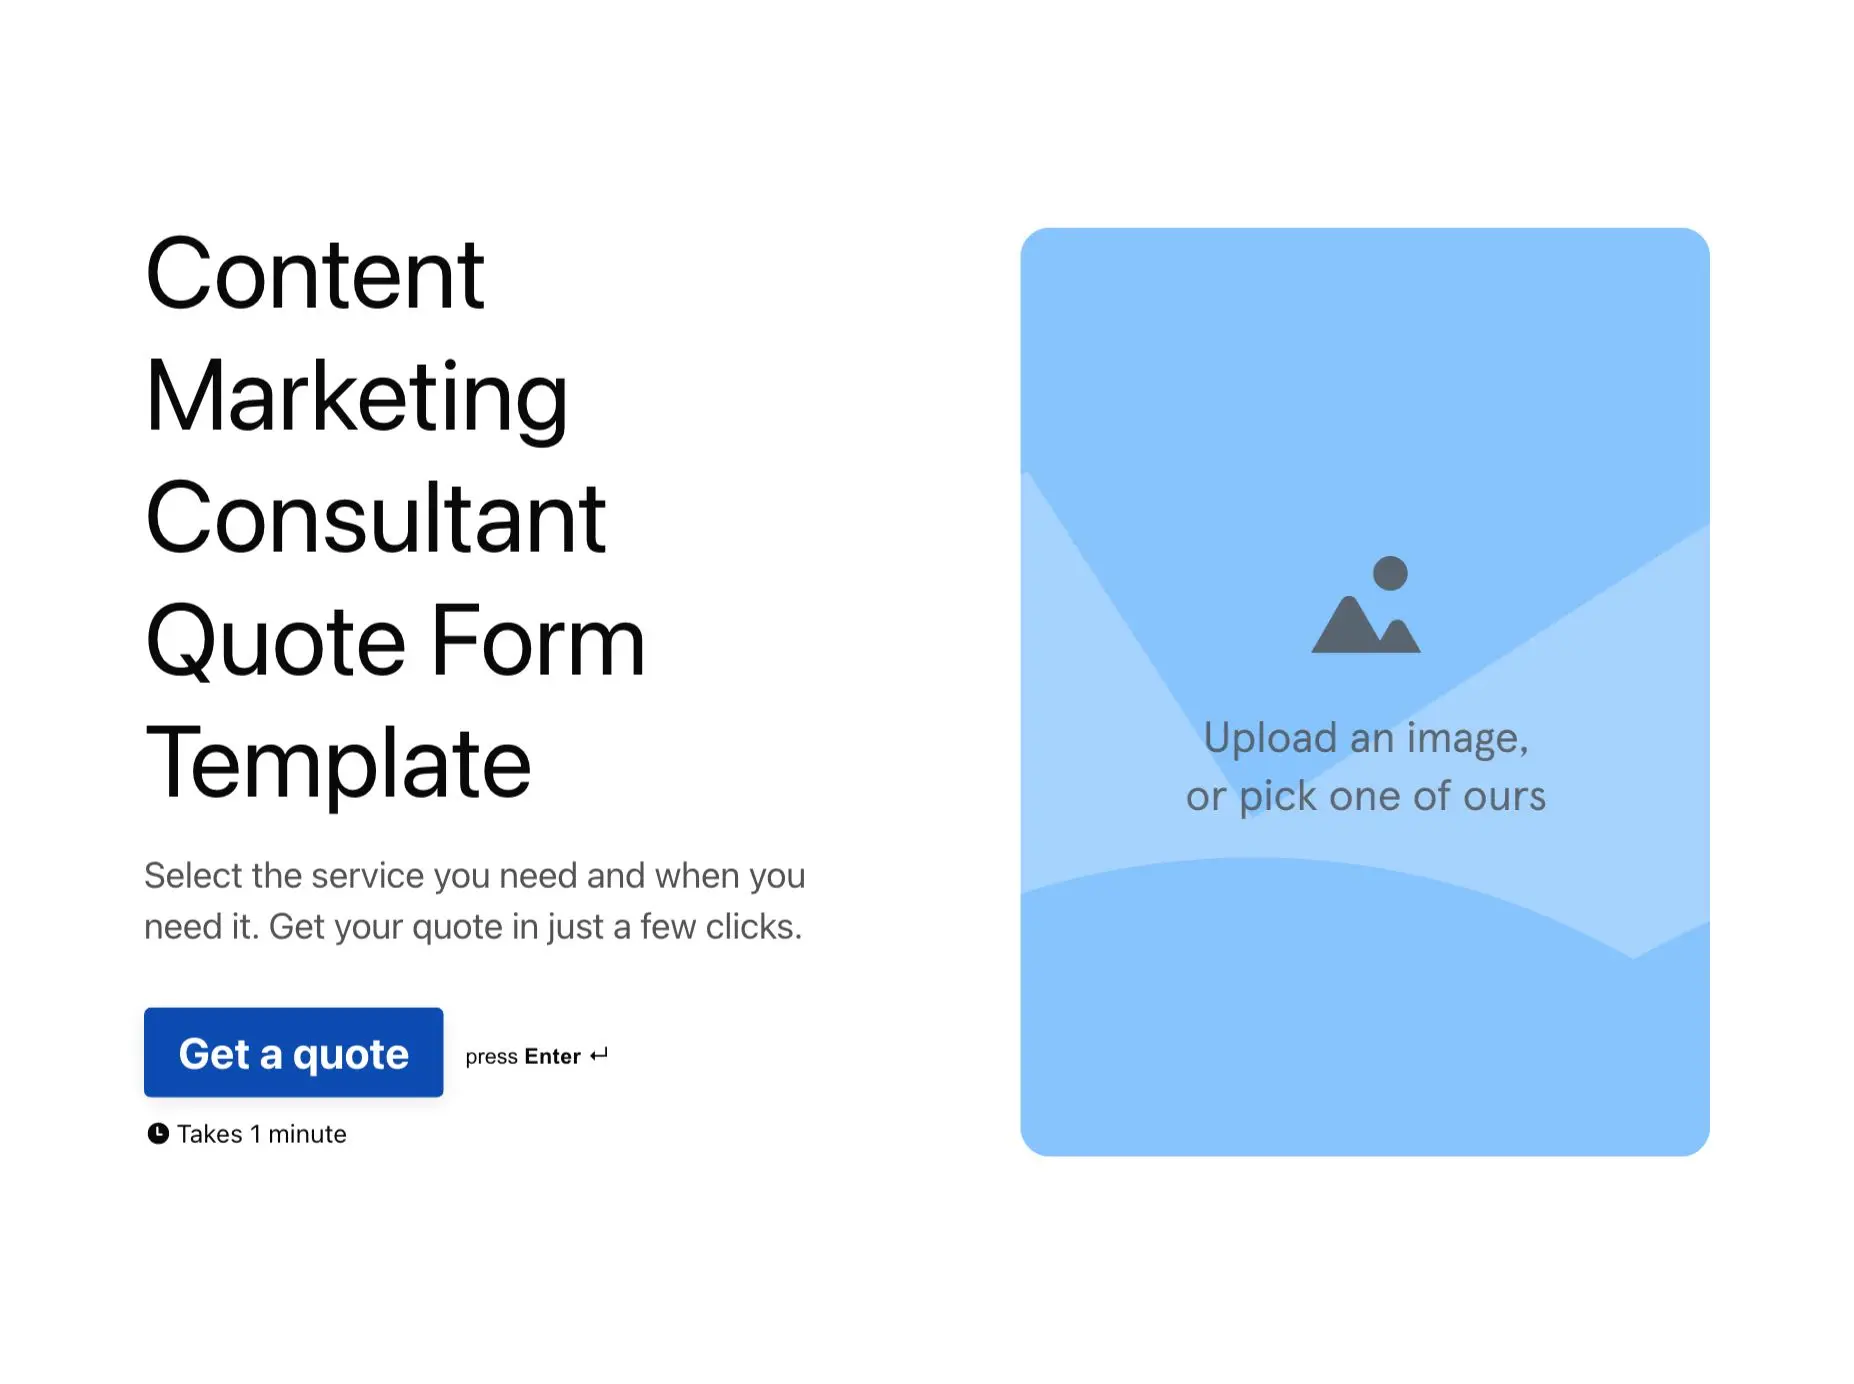 Content Marketing Consultant Quote Form Template Hero